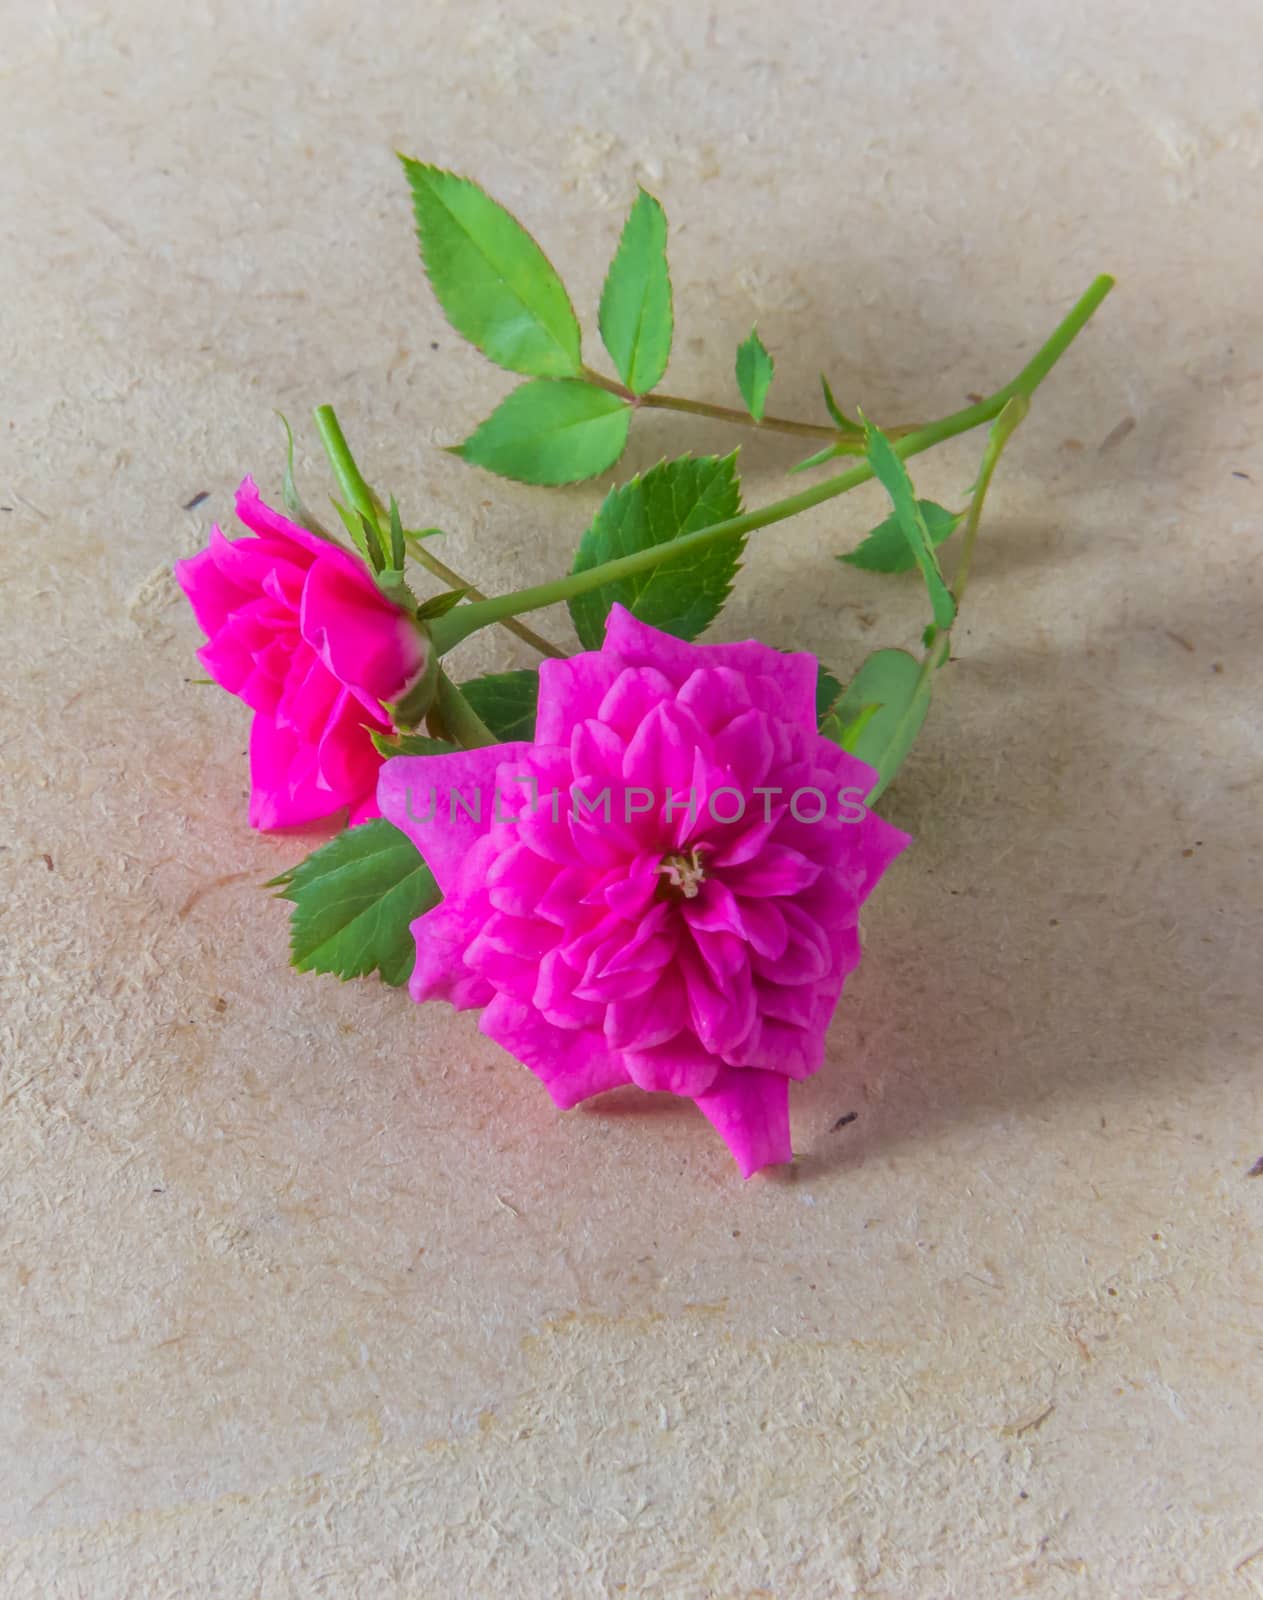 Dwarf Rose.The flowers are small and beautiful. Can grow in a small space